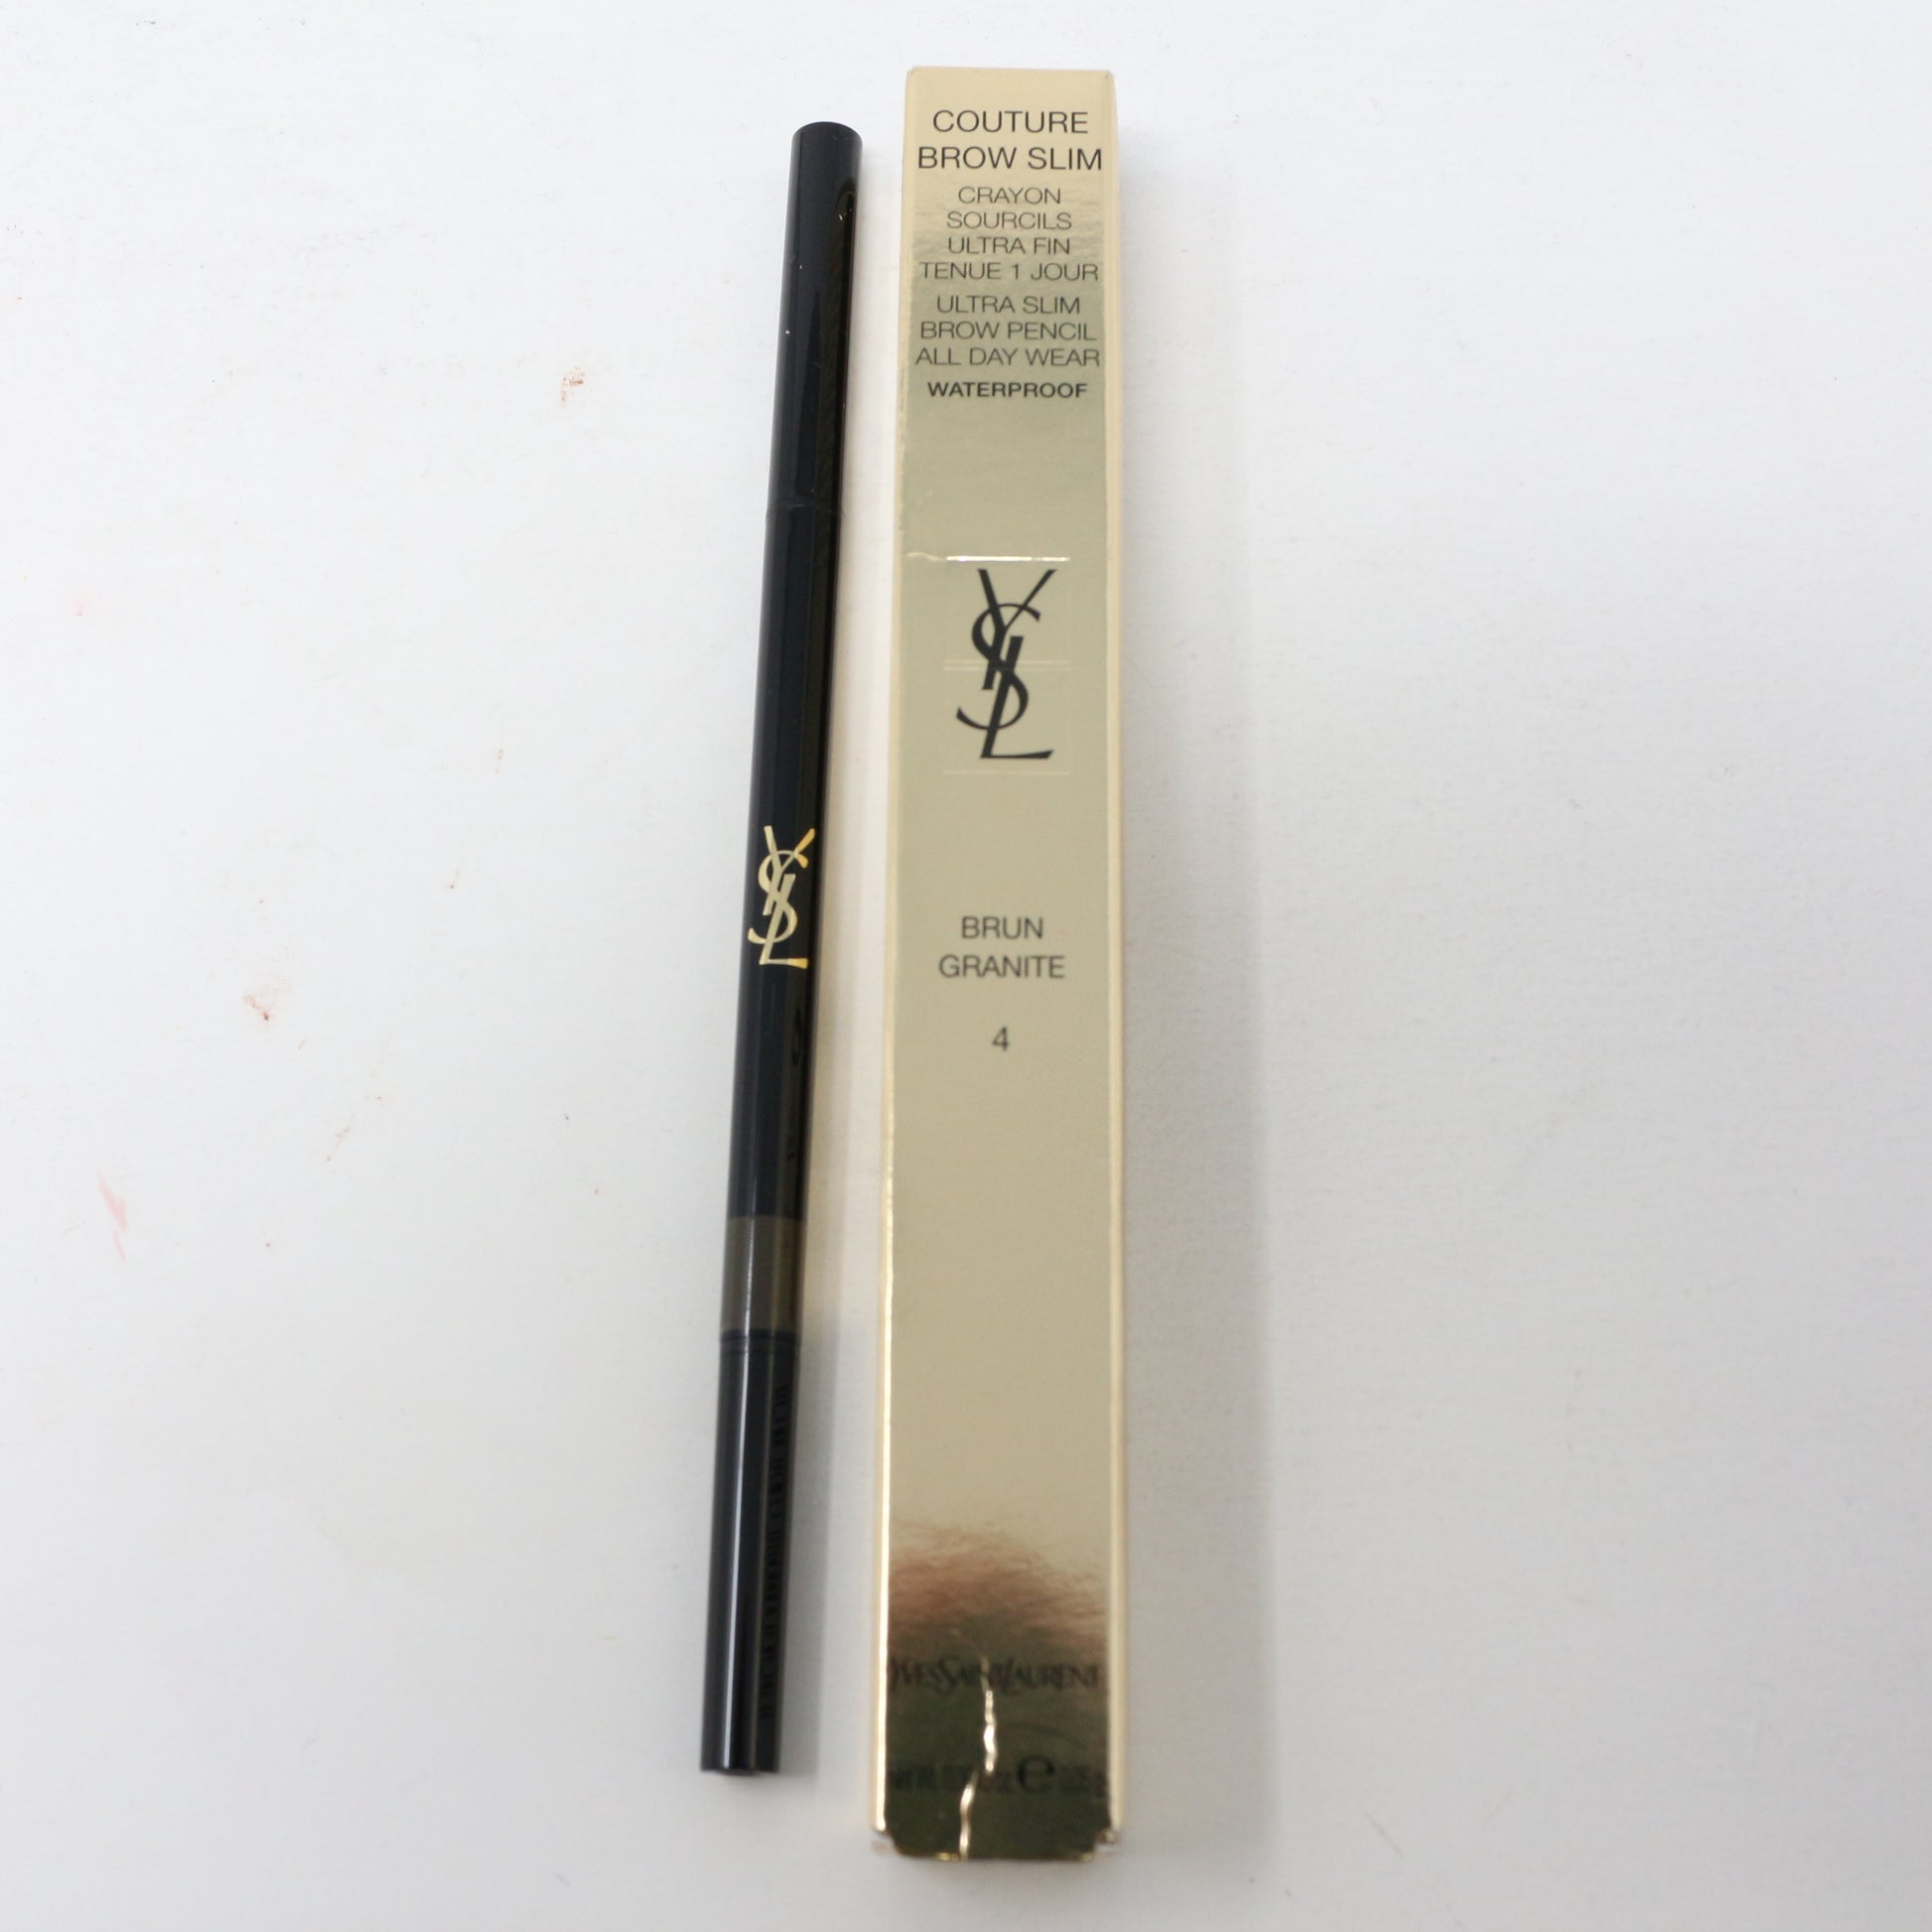 Couture Brow Slim Brow Pencil 0.05 mL